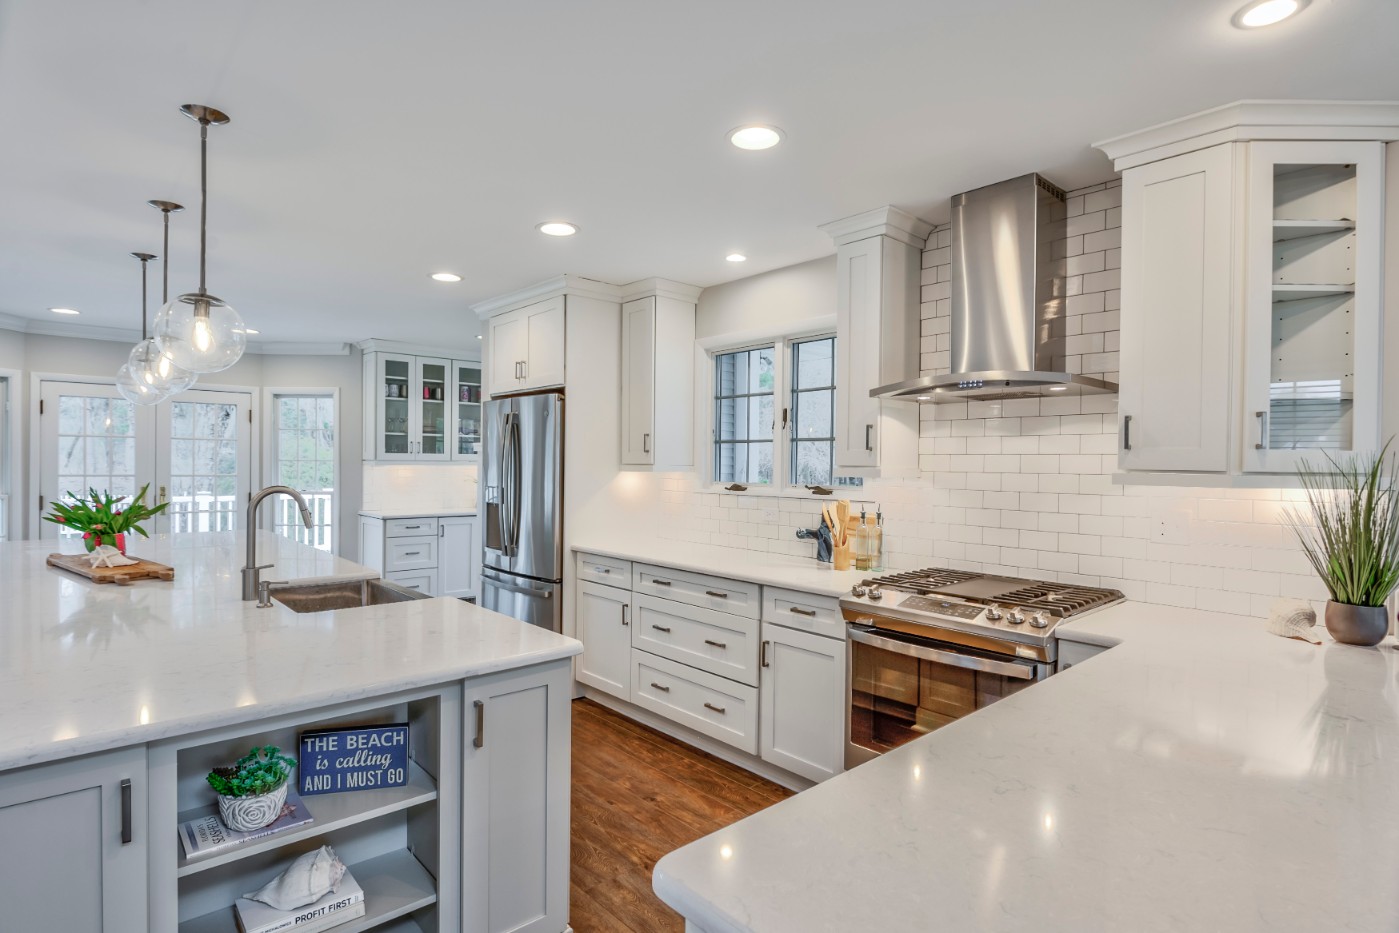 Canal Way Kitchen Remodel in Bethany Beach DE with White Countertop and Recessed Can Lights